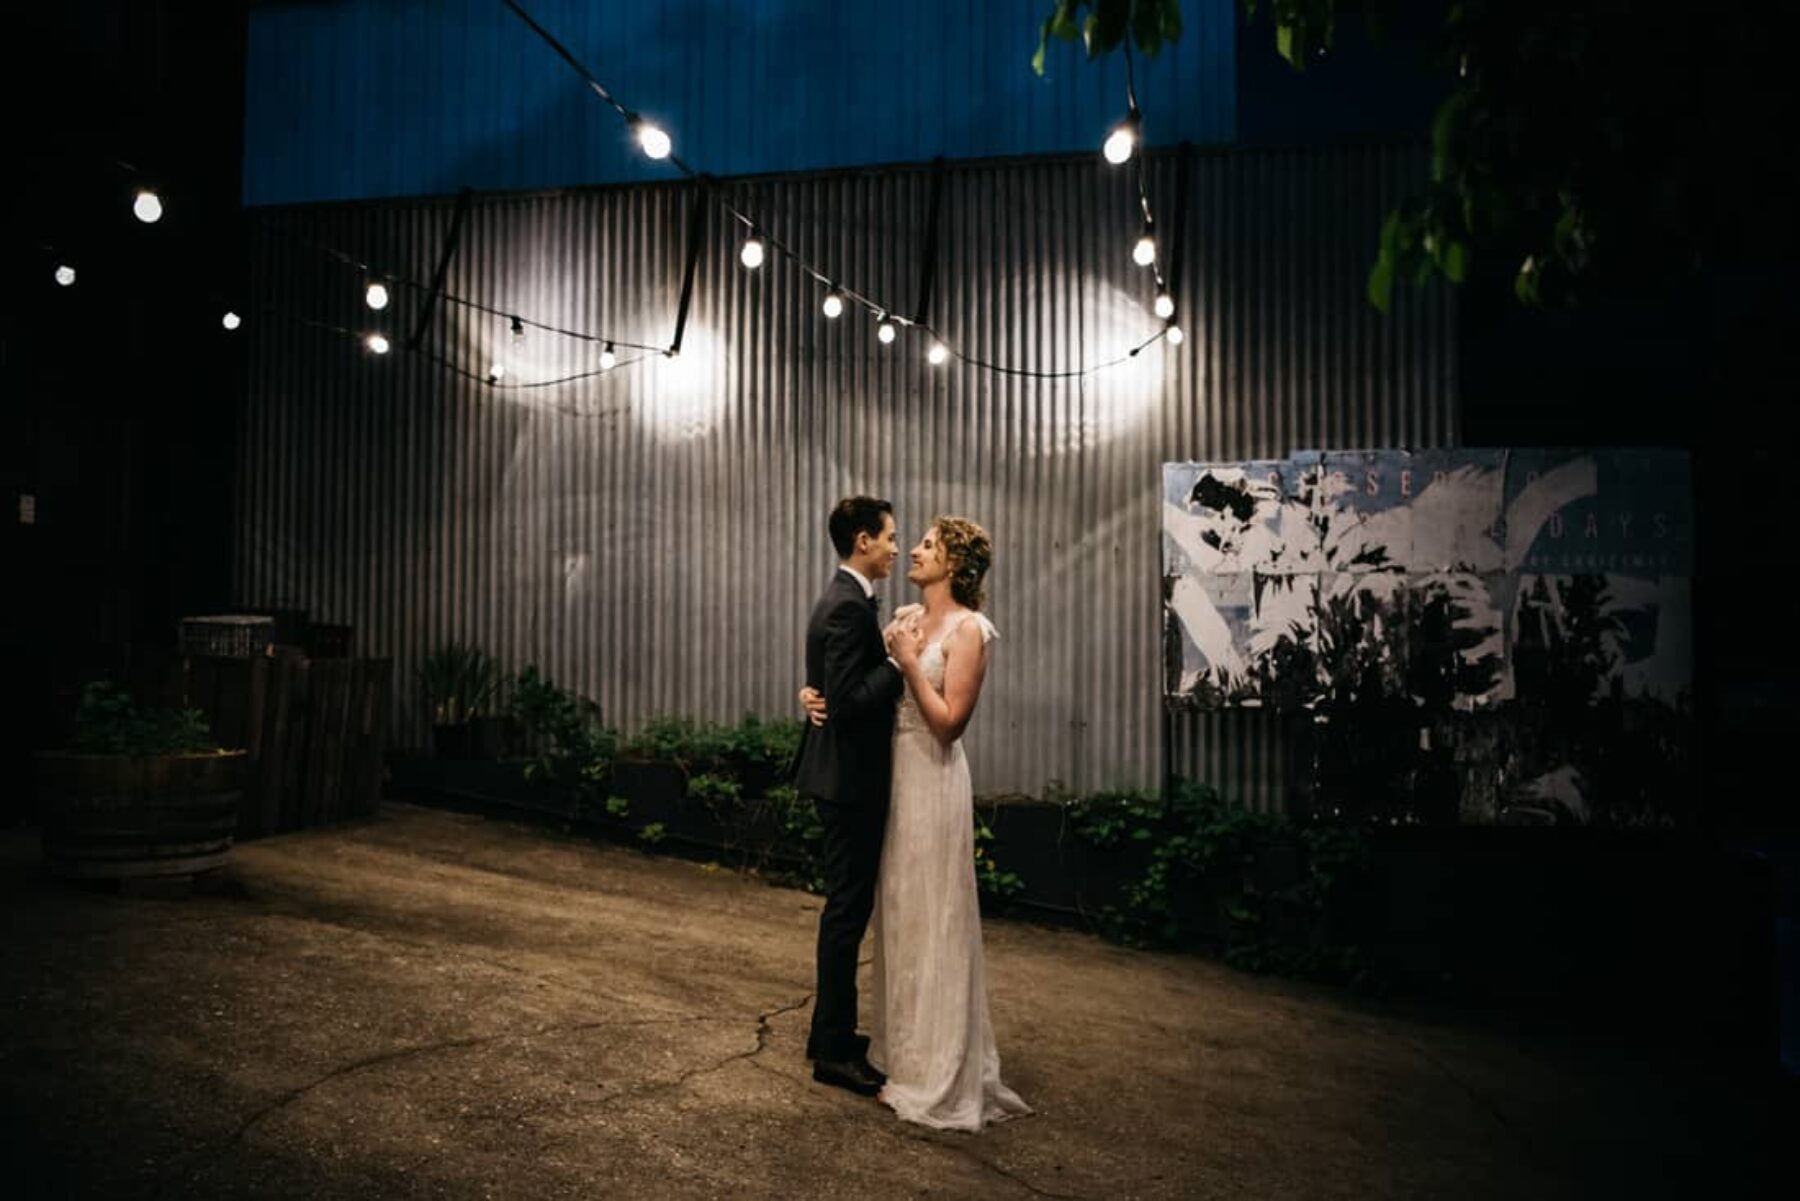 Moody Brisbane wedding at Vieille Branche by Peppermint Photography